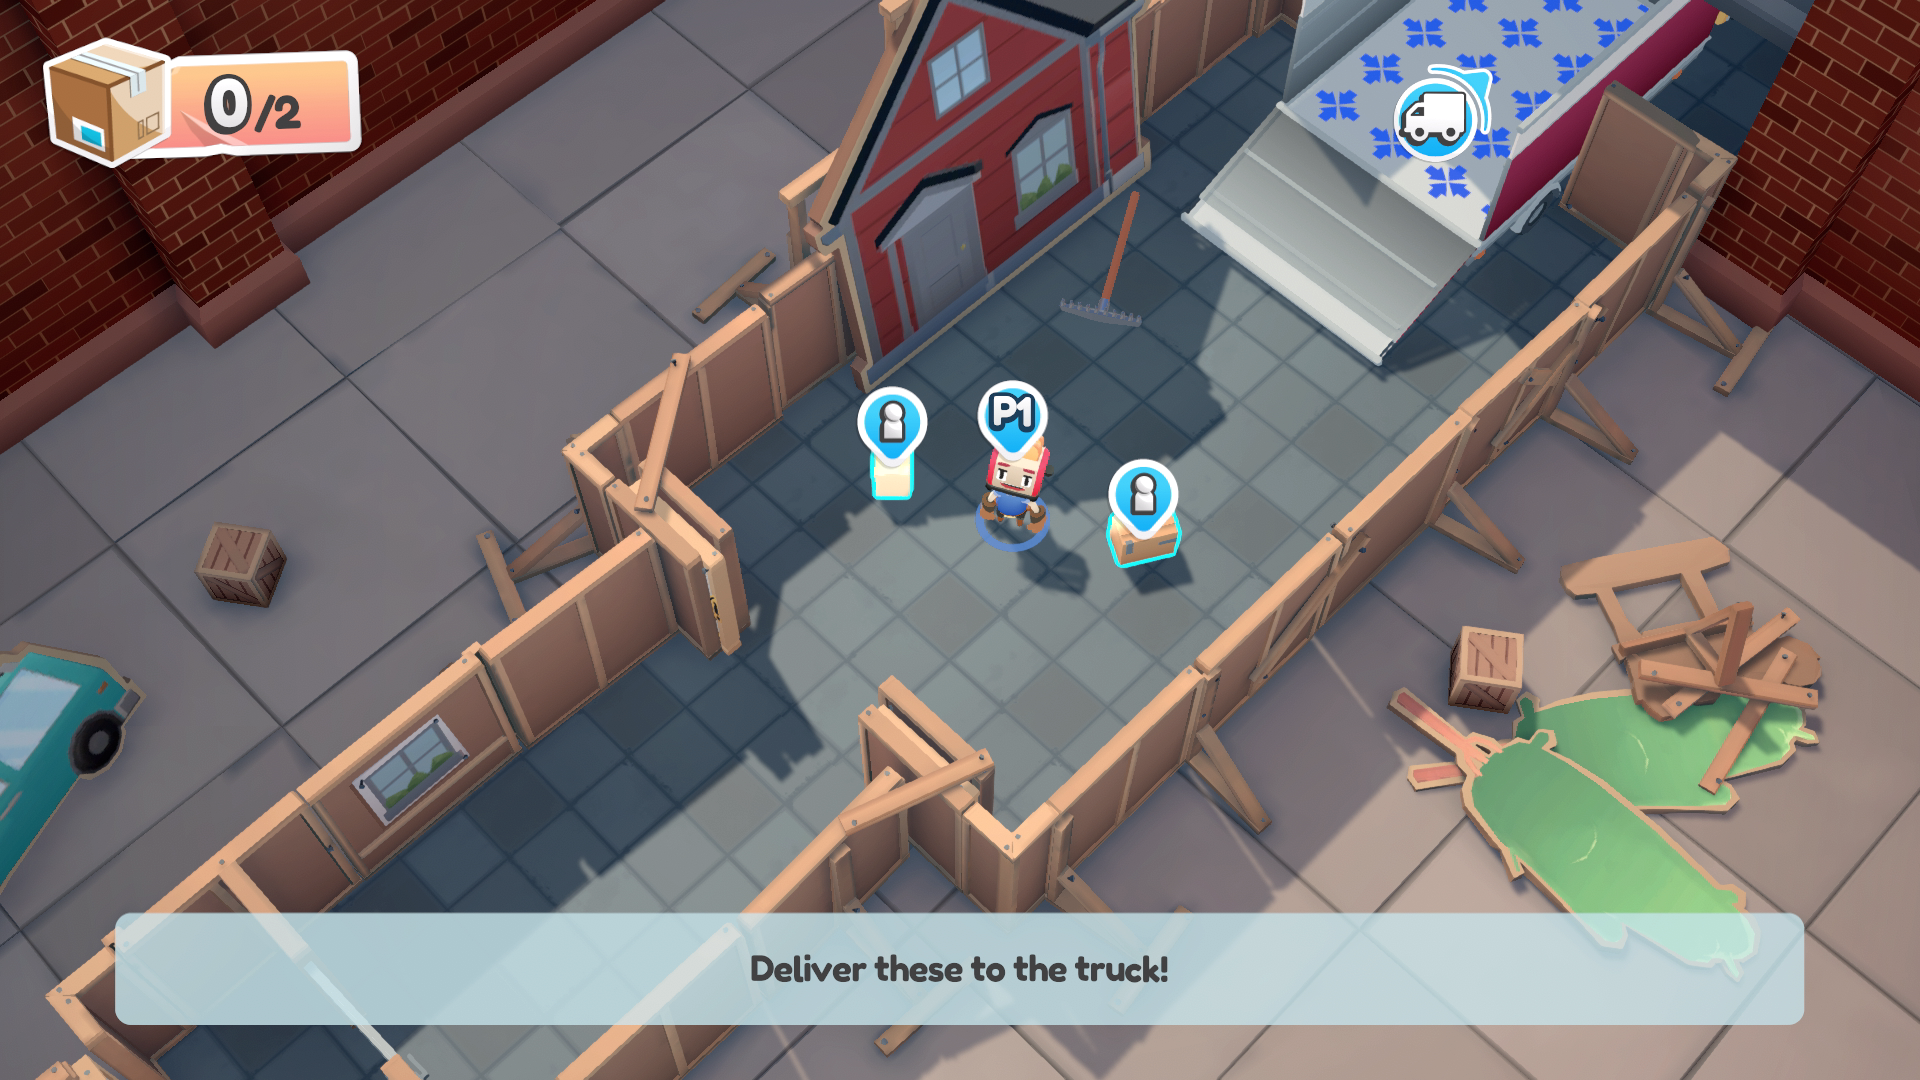 Moving Out screenshot with the playable character, two moveable items, and the truck highlighted with icons.